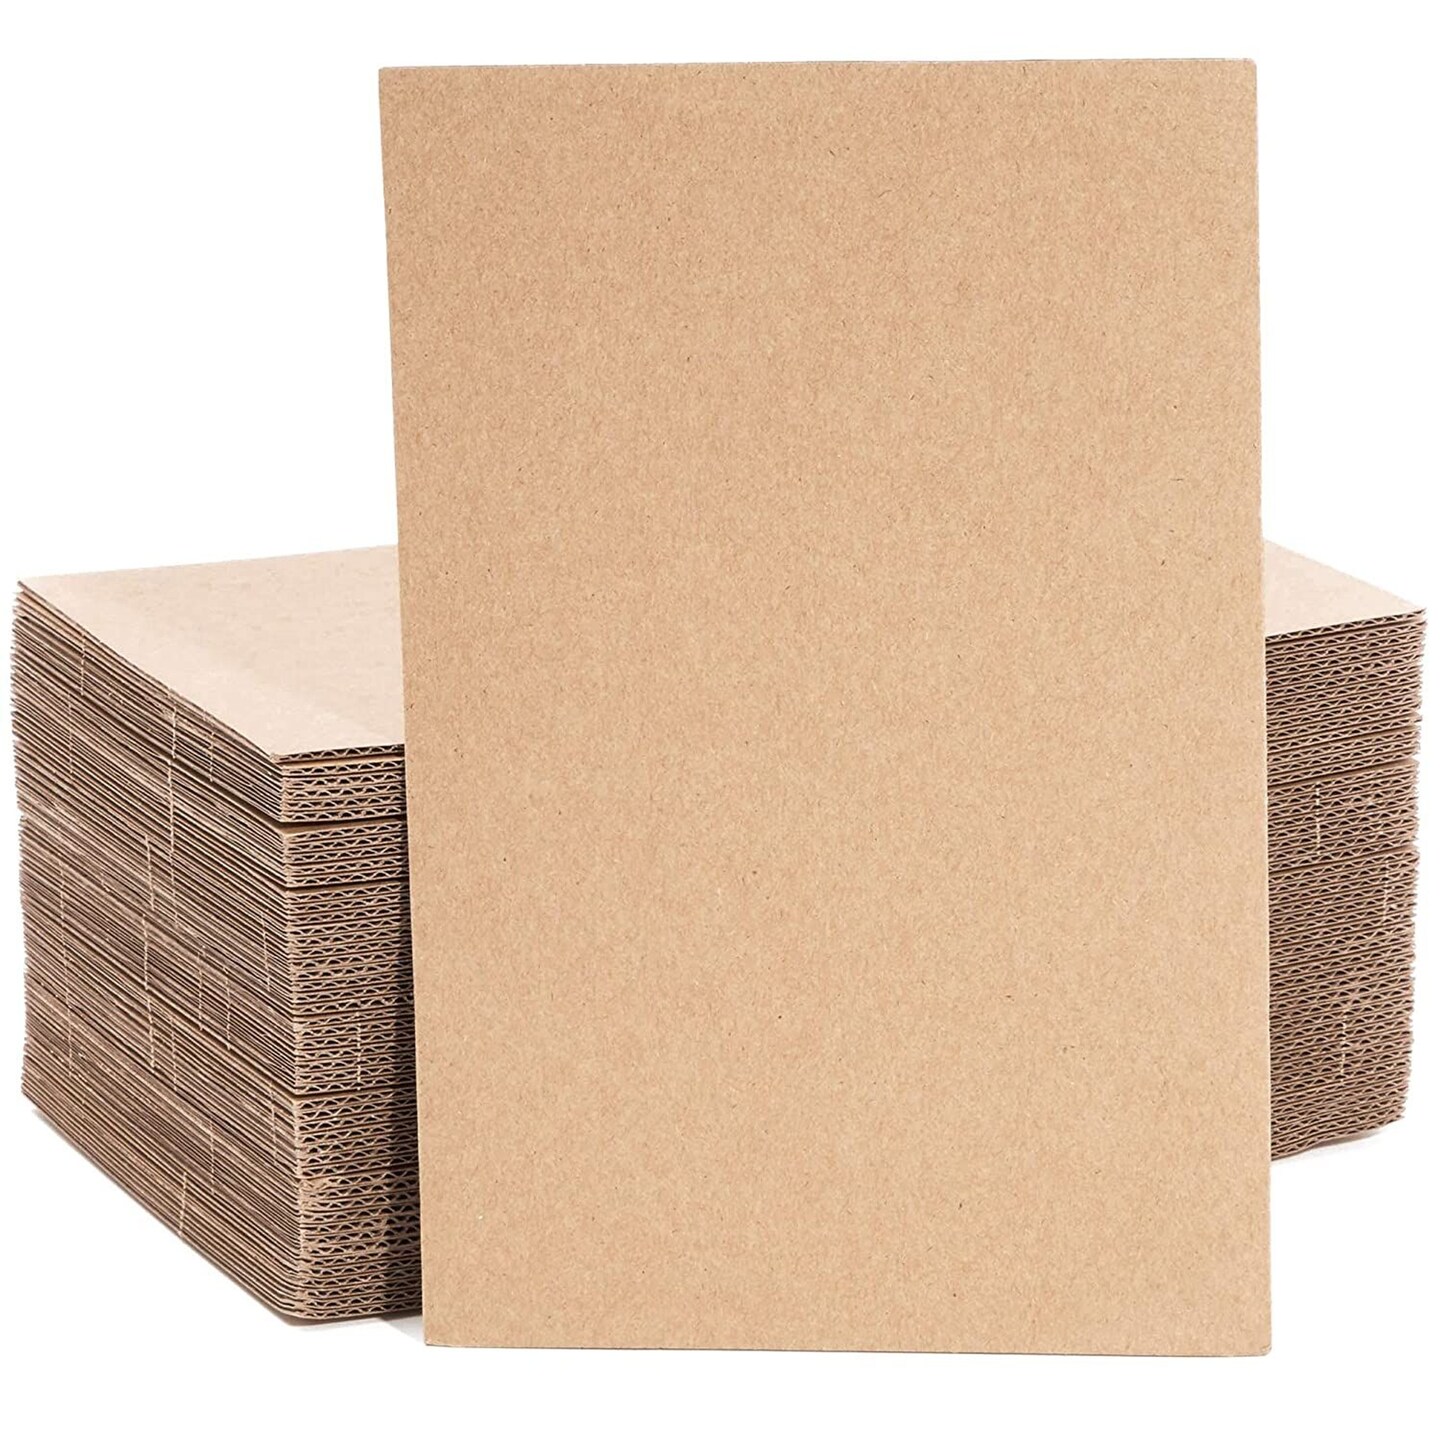 Cardboard Inserts For Mailers